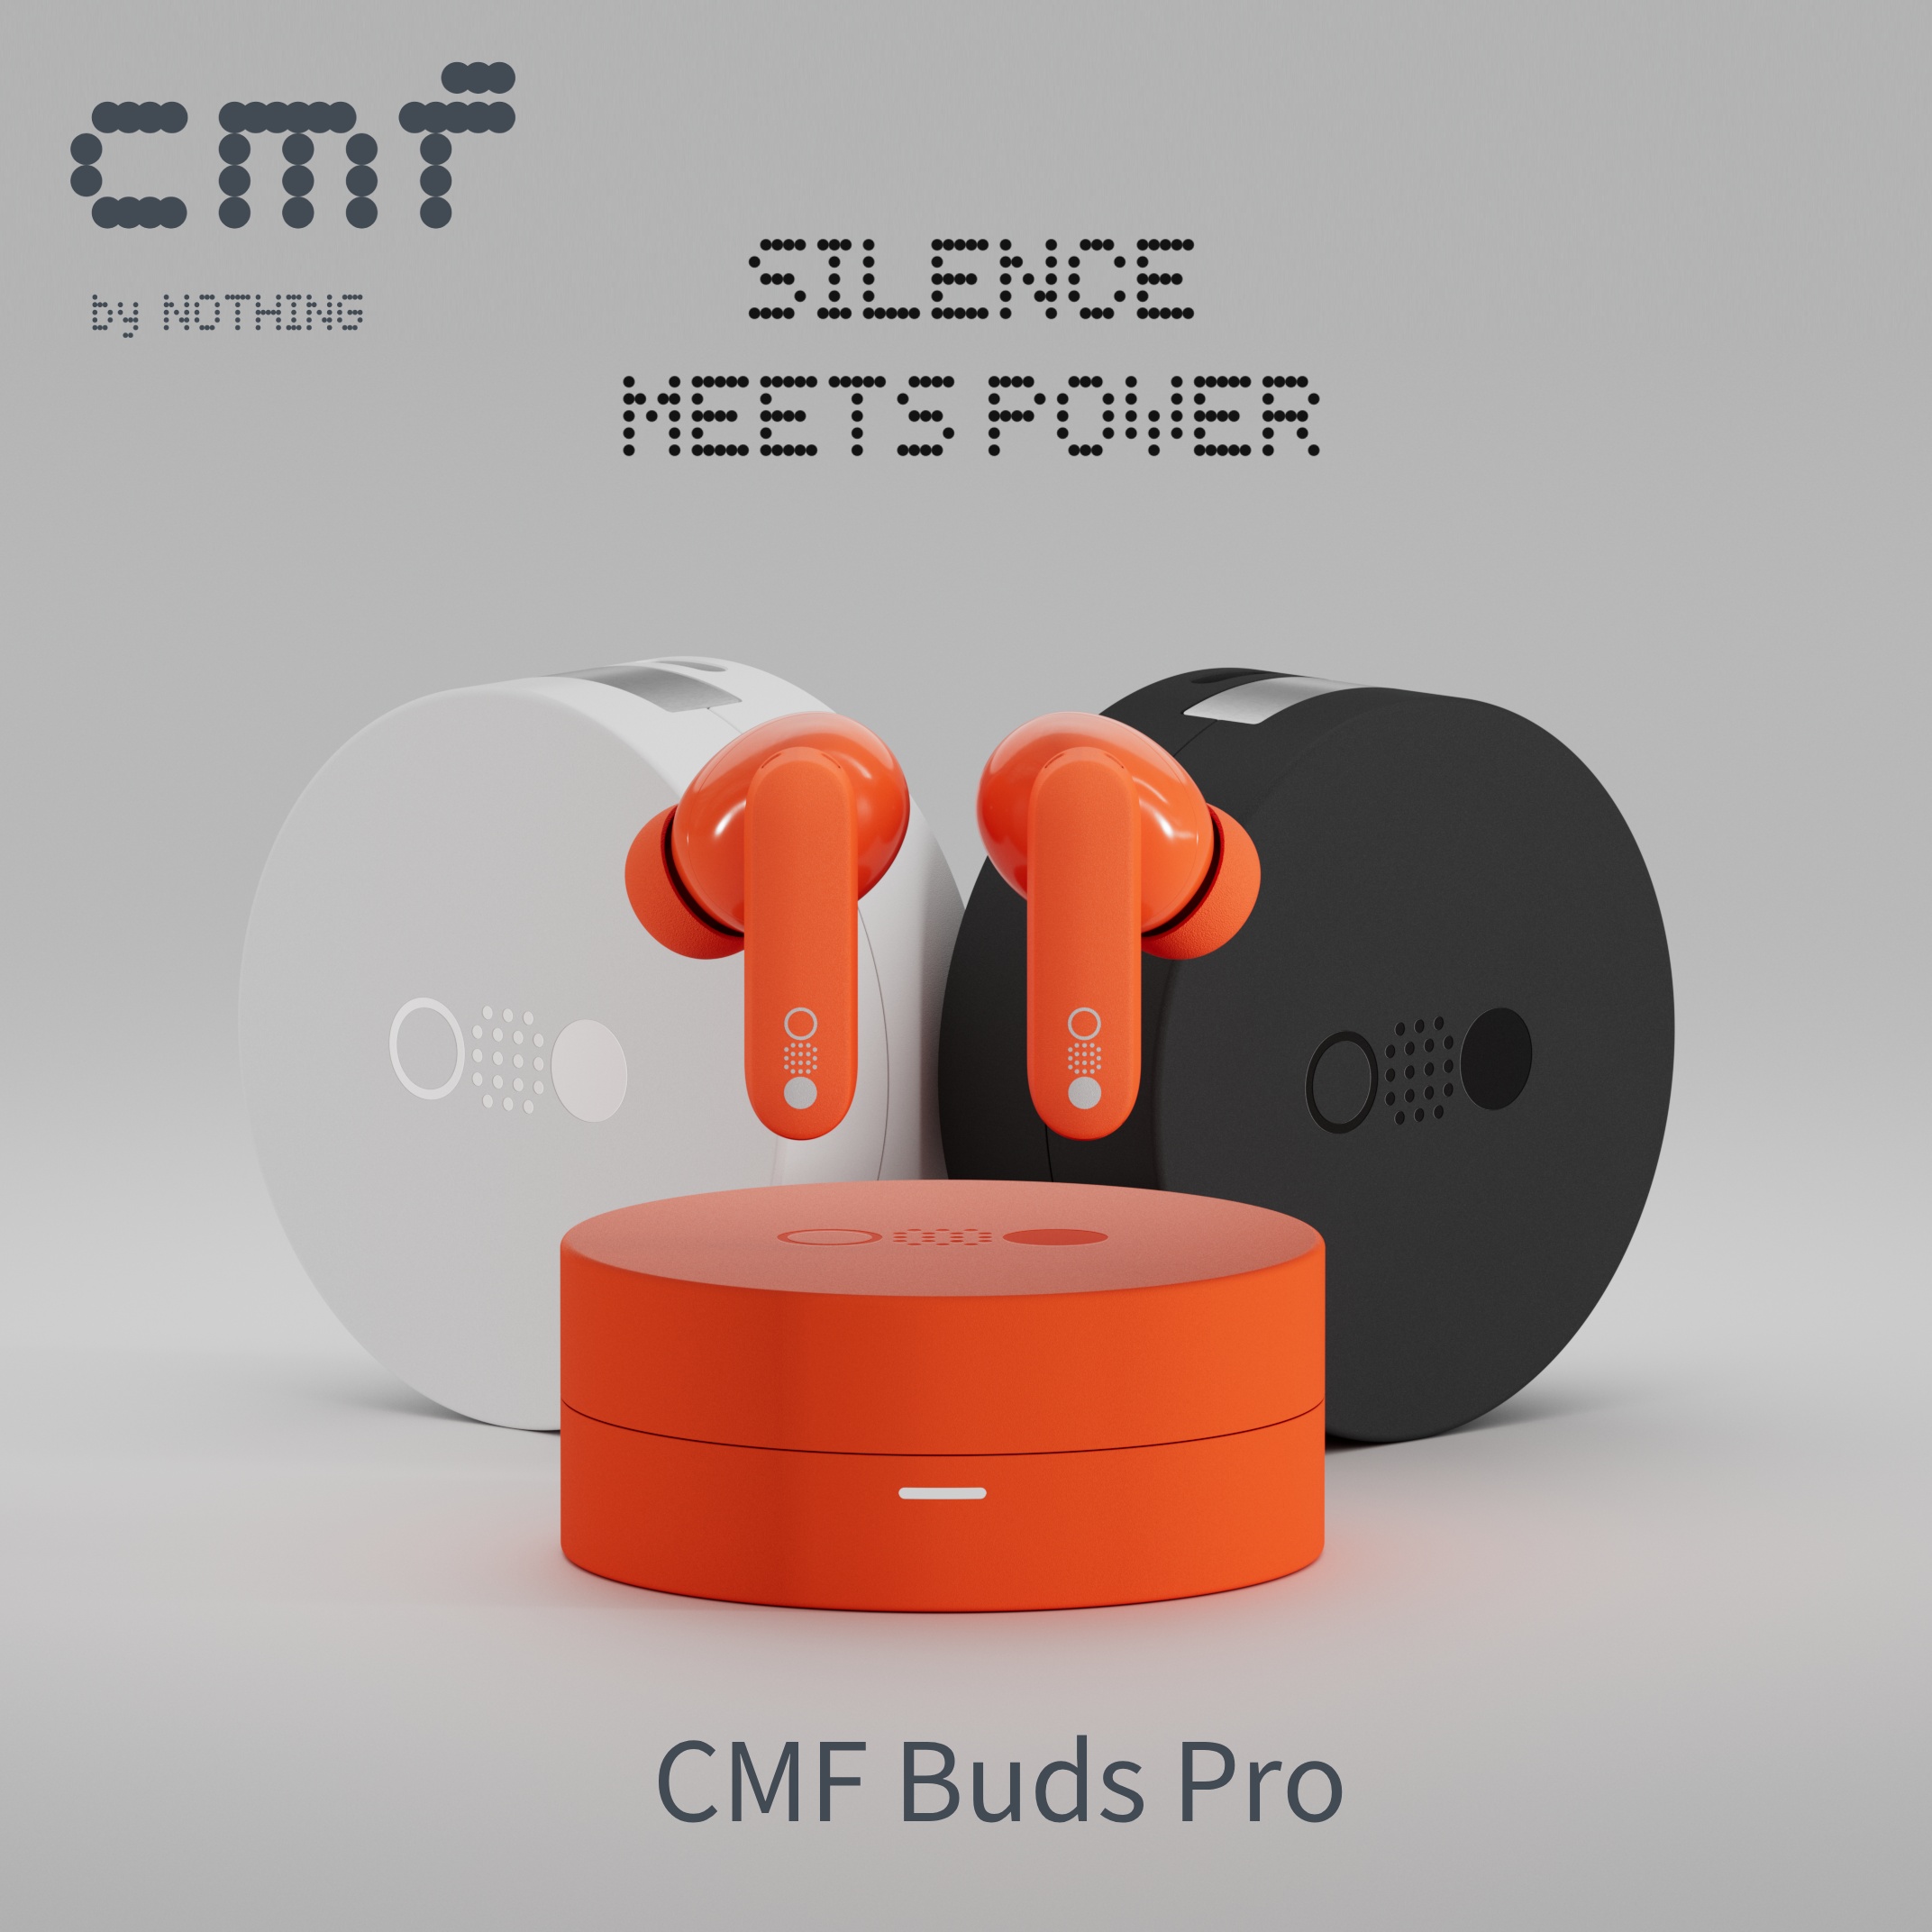 

Cmf By Nothing Buds Pro In Ear Wirelesss Earphones With 45 Db Anc, Ultra Bass Technology, Custom Dynamic Bass, 5000 Hz Wide Band Noise Cancellation, 6 Hd Mics And Up To 39 Hours Of Battery